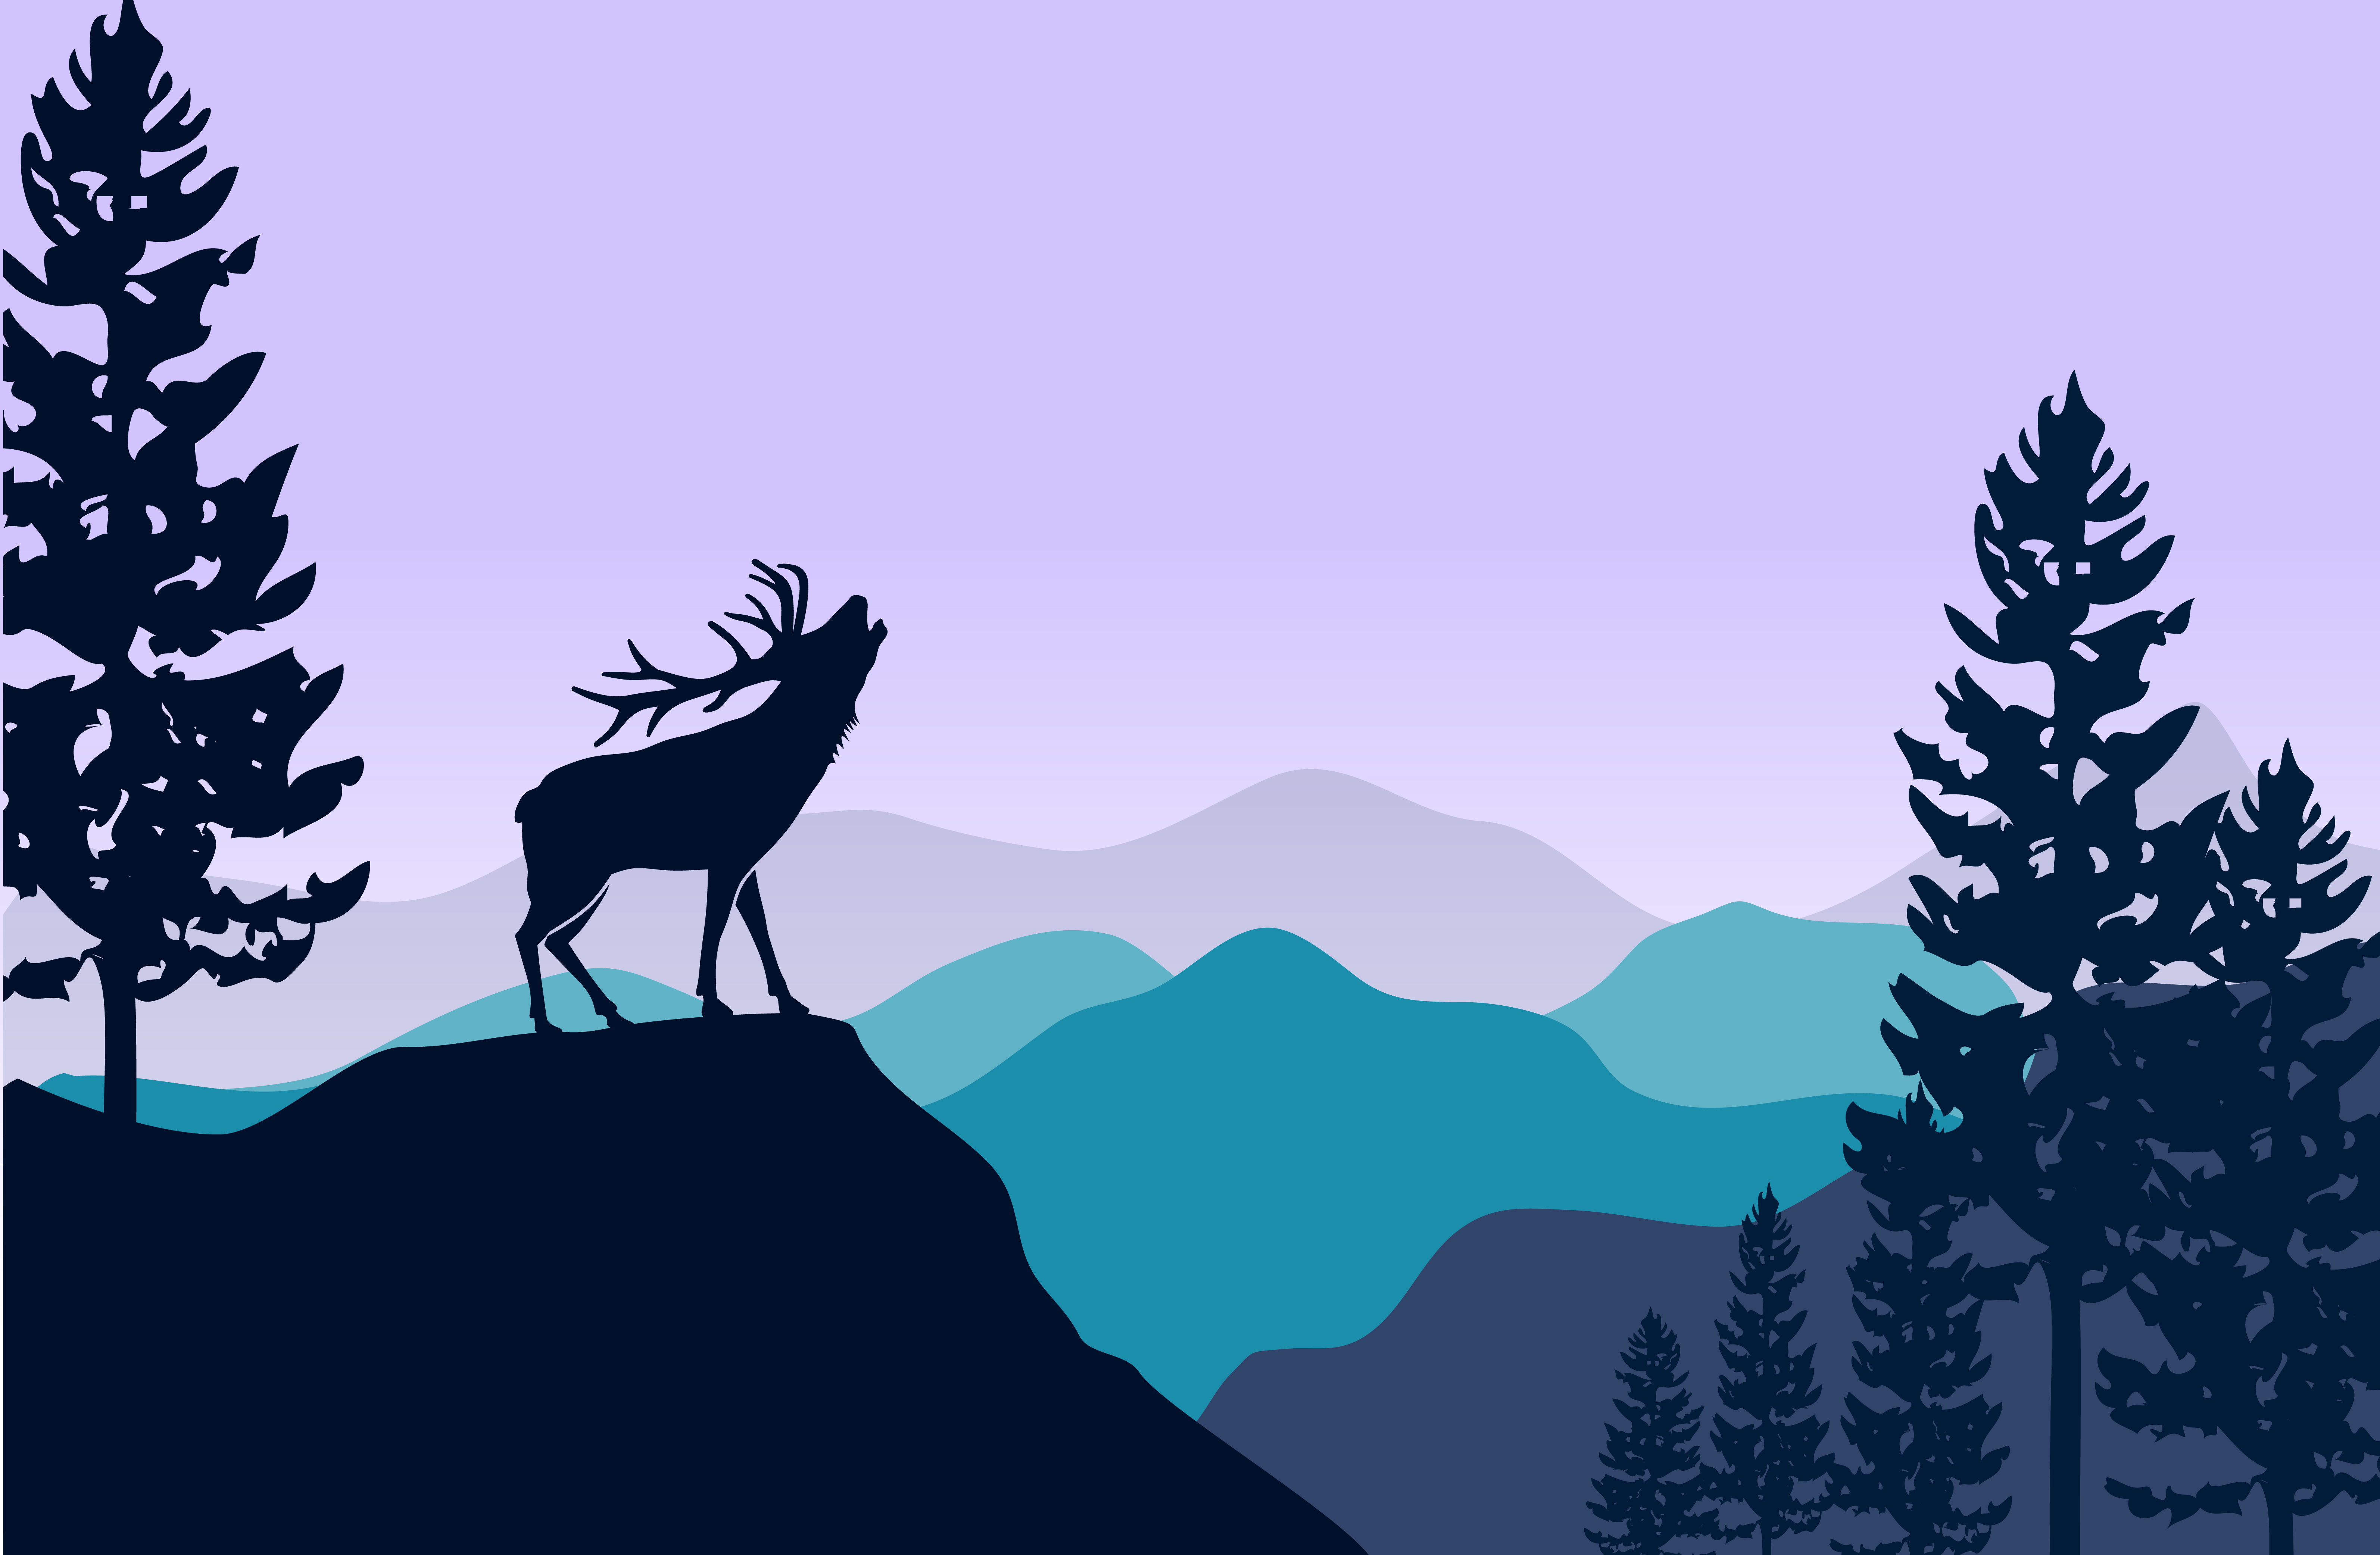 Silhouette of deer and pine trees 1213492 - Download Free Vectors